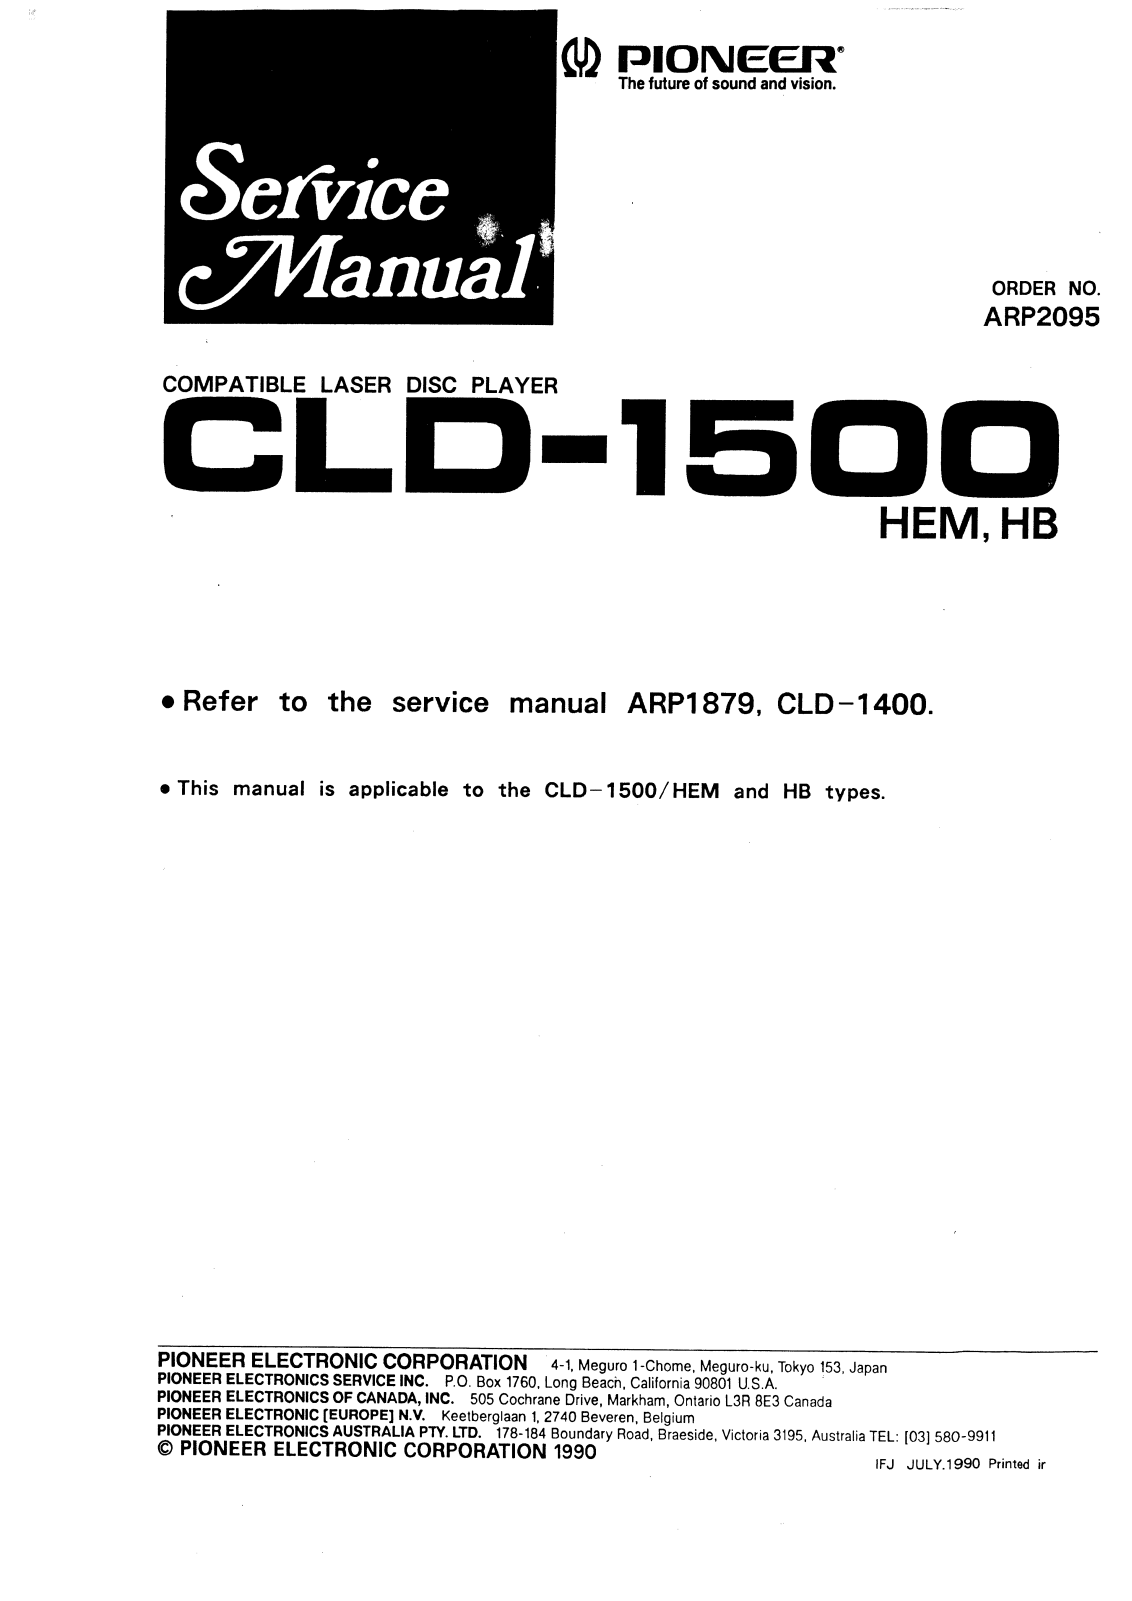 Pioneer CLD-1500 Service manual